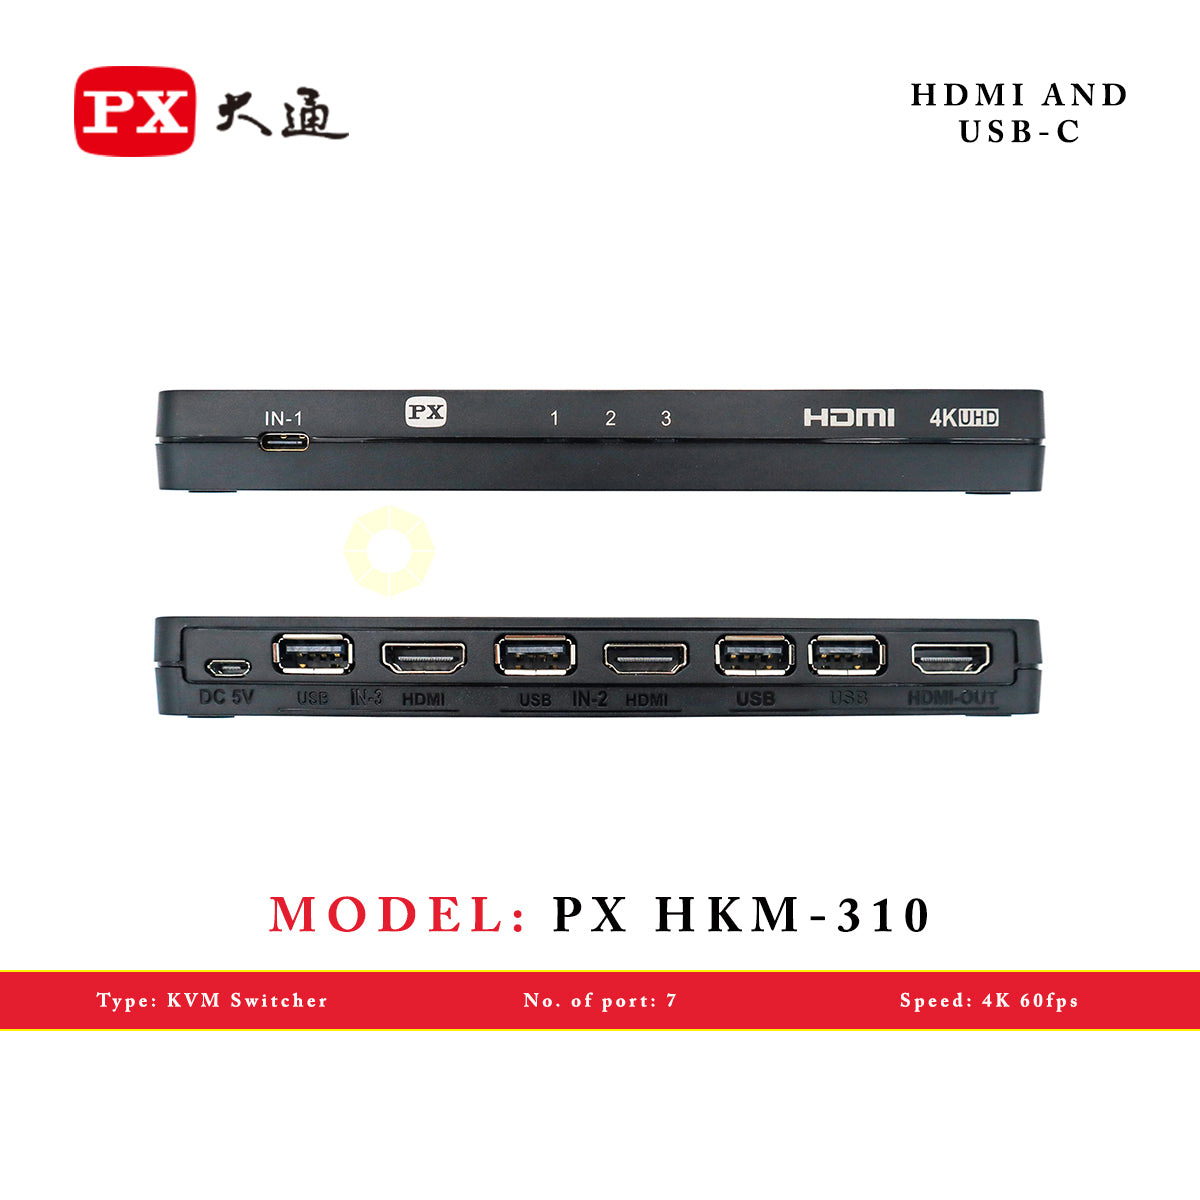 PX HKM-310 HDMI AND USB-C (3 INPUT 1 OUT